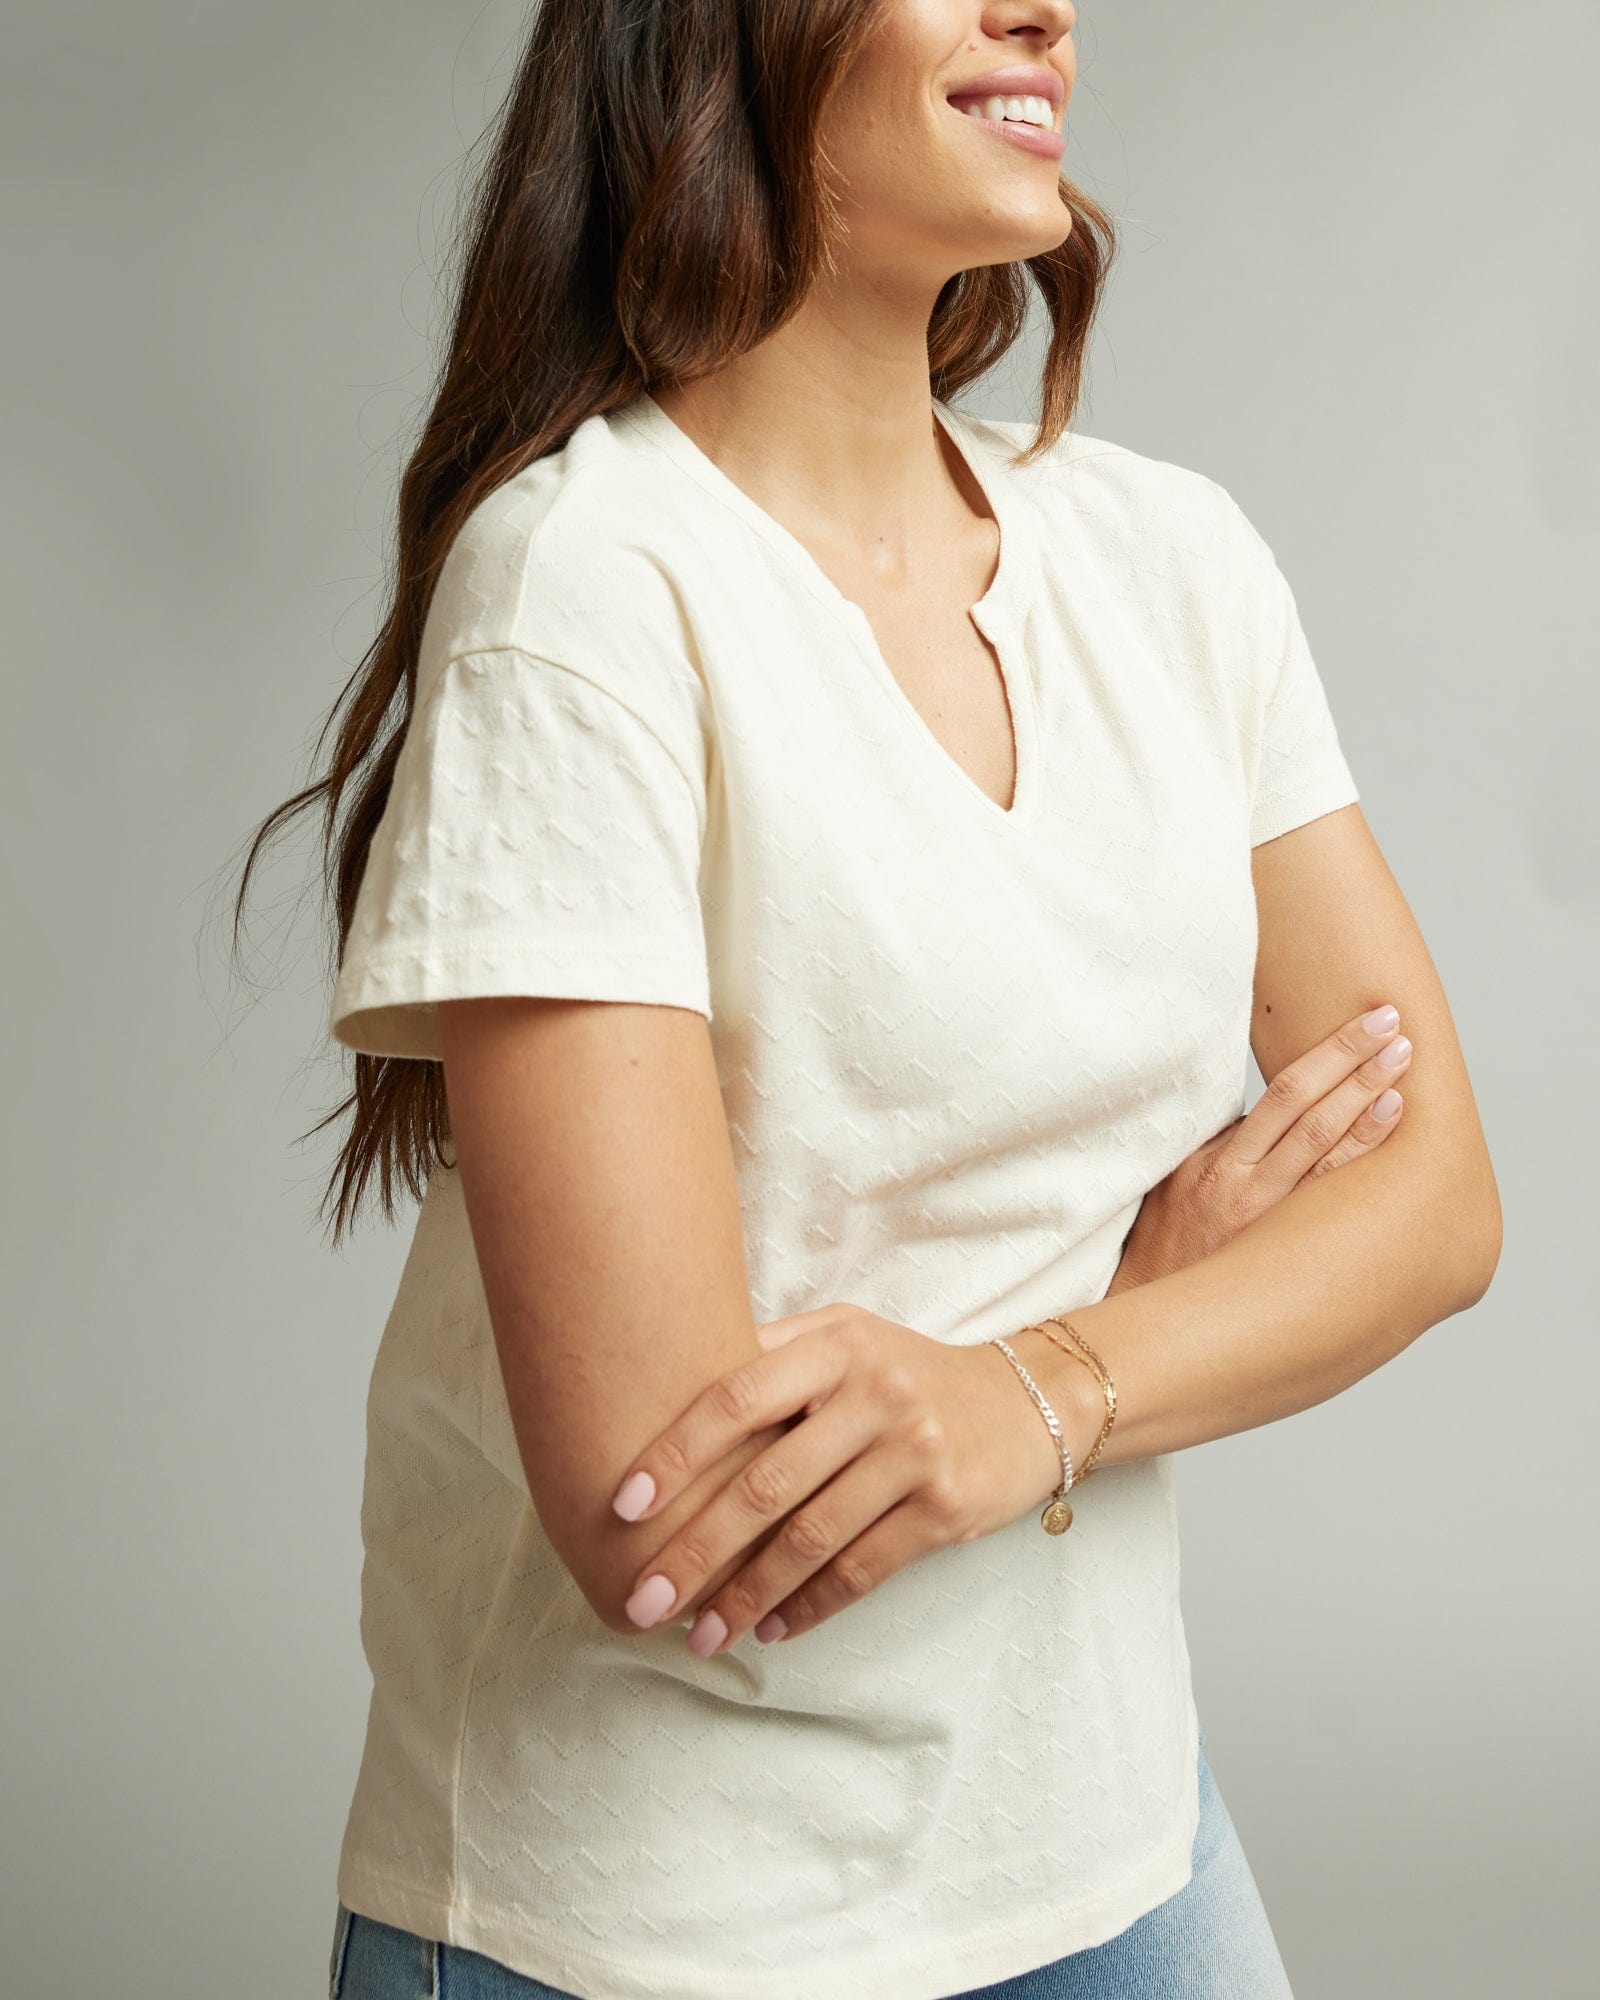 Woman in a shosrt sleeve, white tee